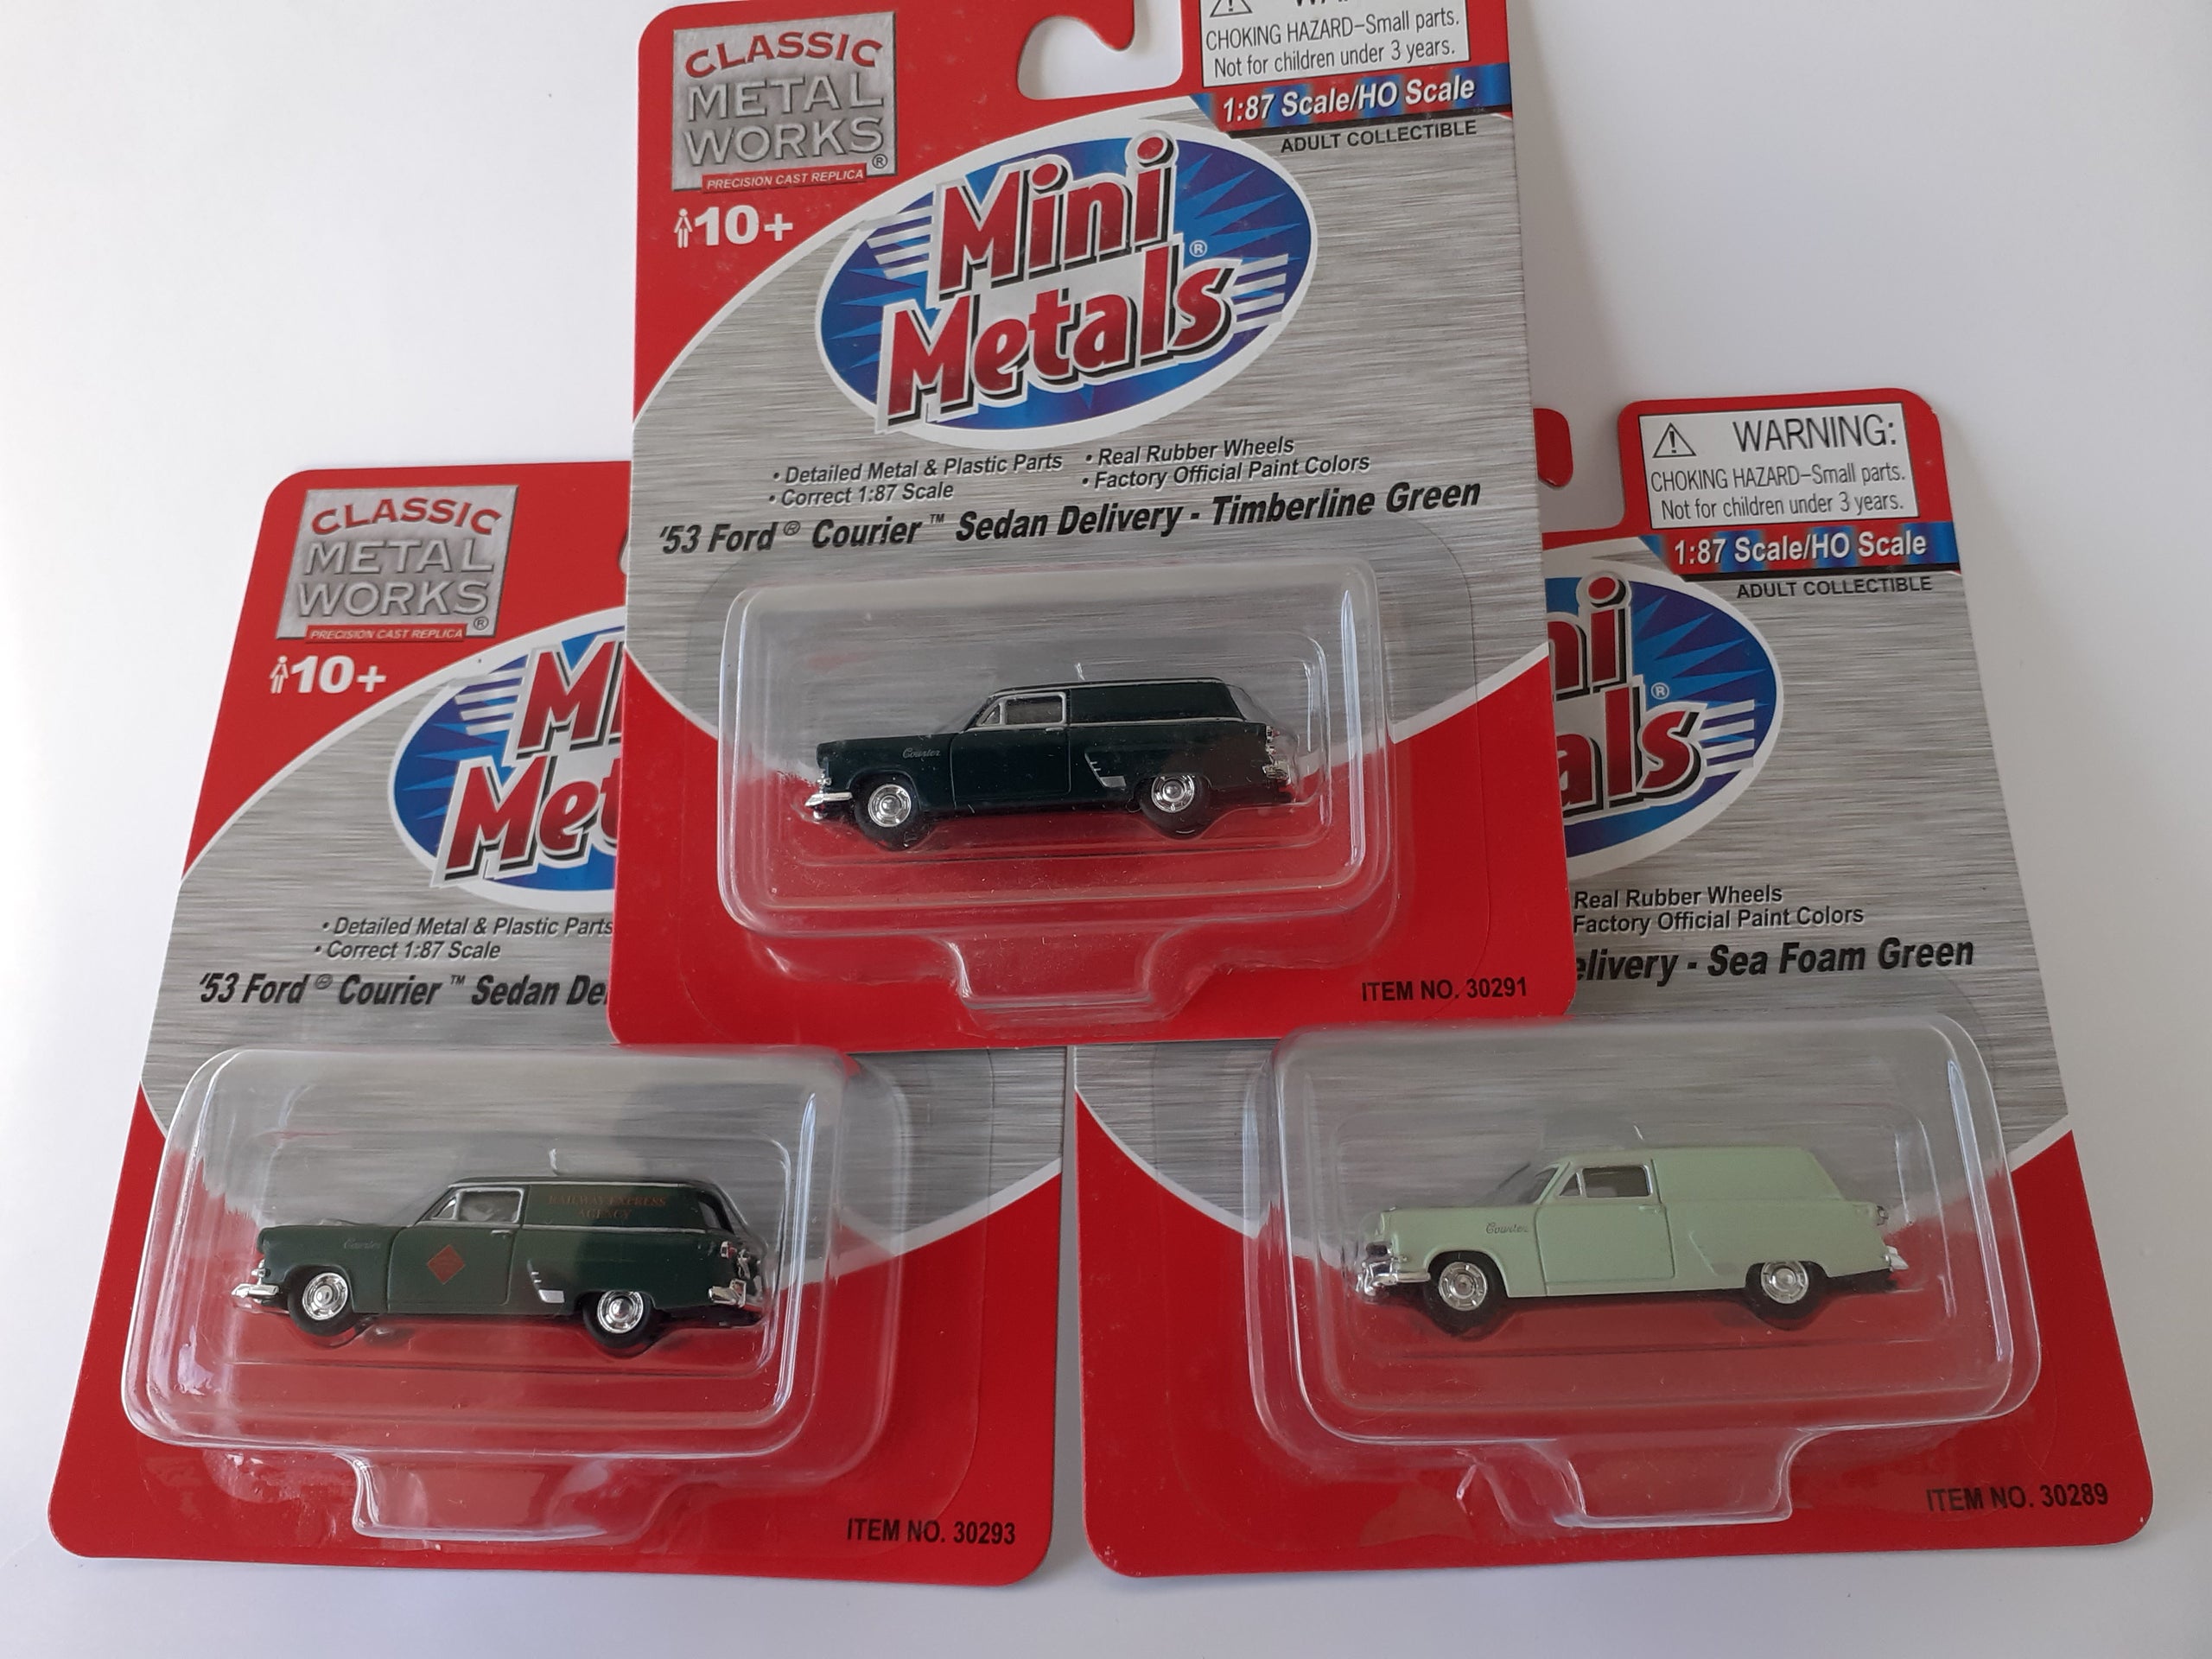 Classic Metal Works 30289 HO Mini Metals /'53 Ford Courier Sedan Delivery Wagon